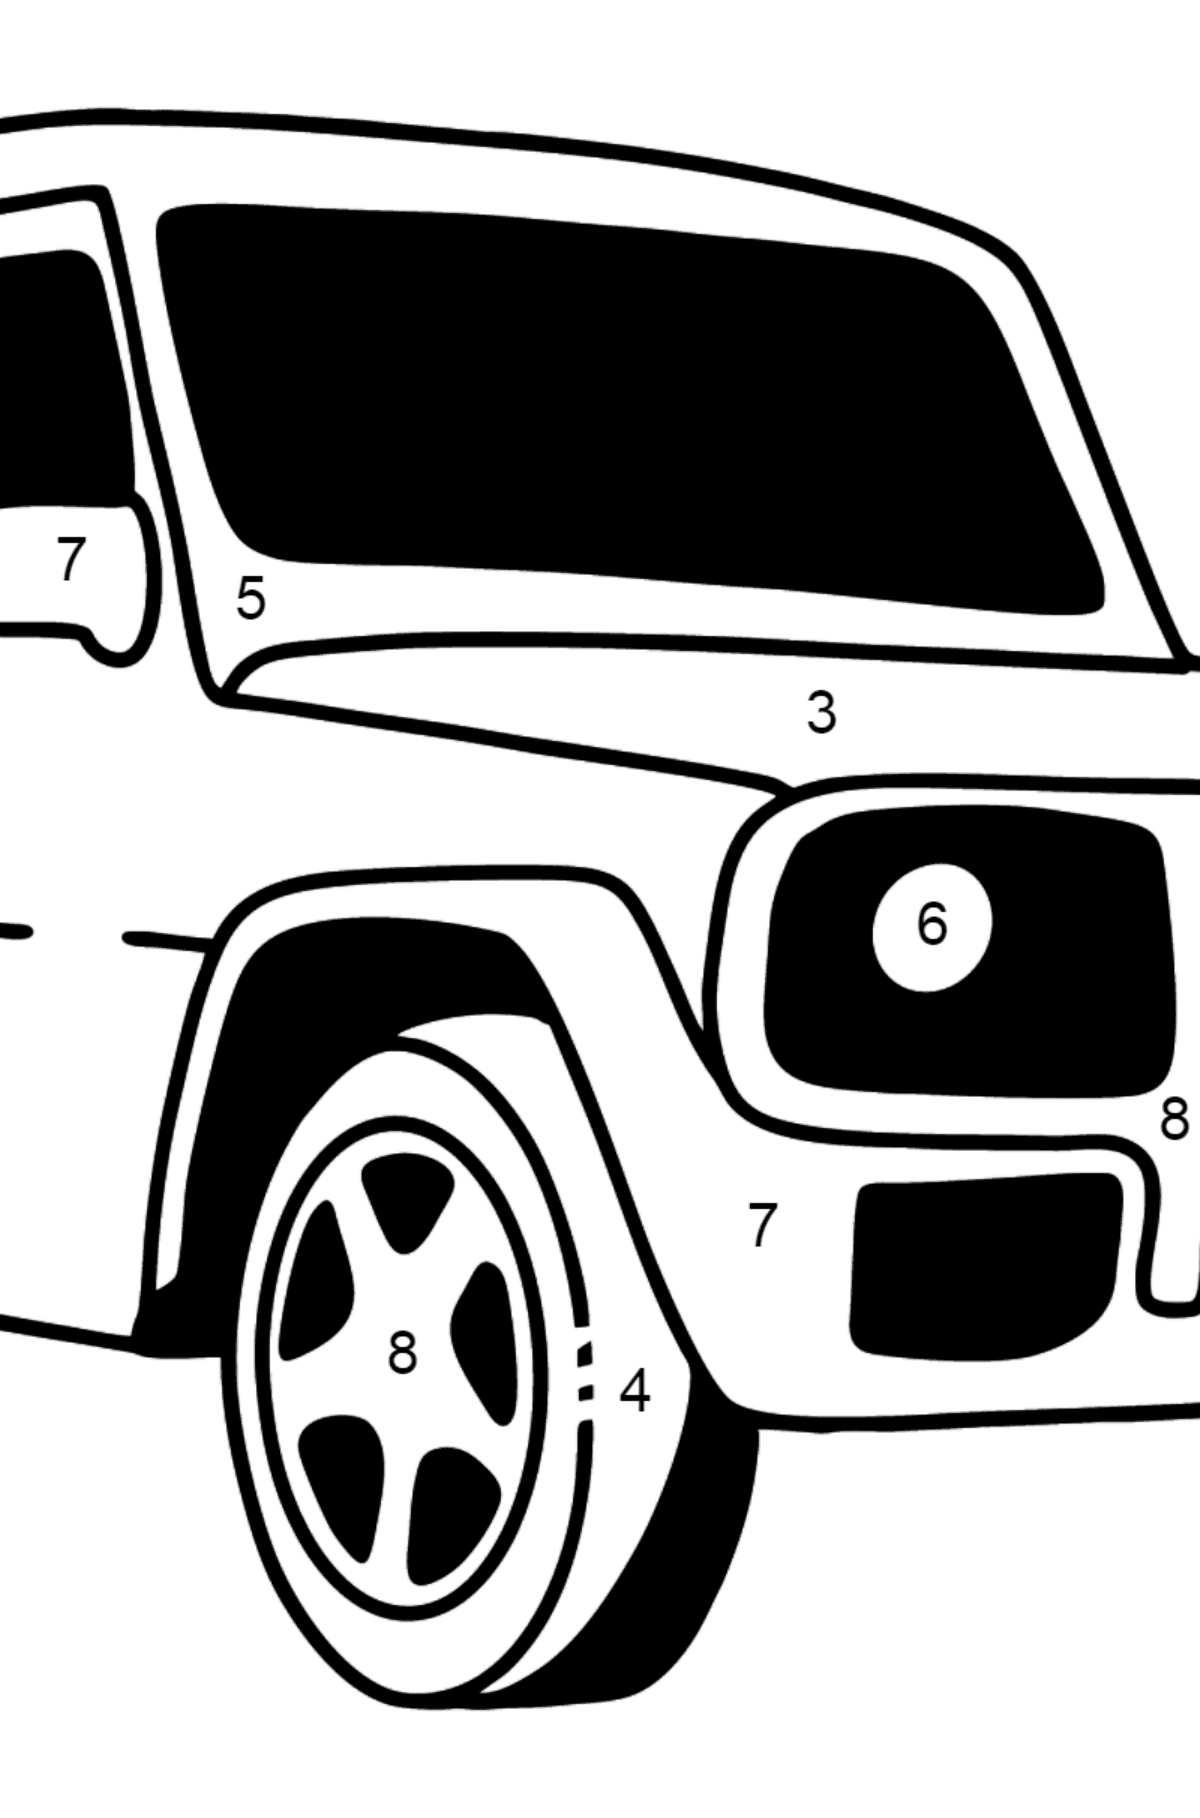 Mercedes-Benz G-Class SUV coloring page - Coloring by Numbers for Kids